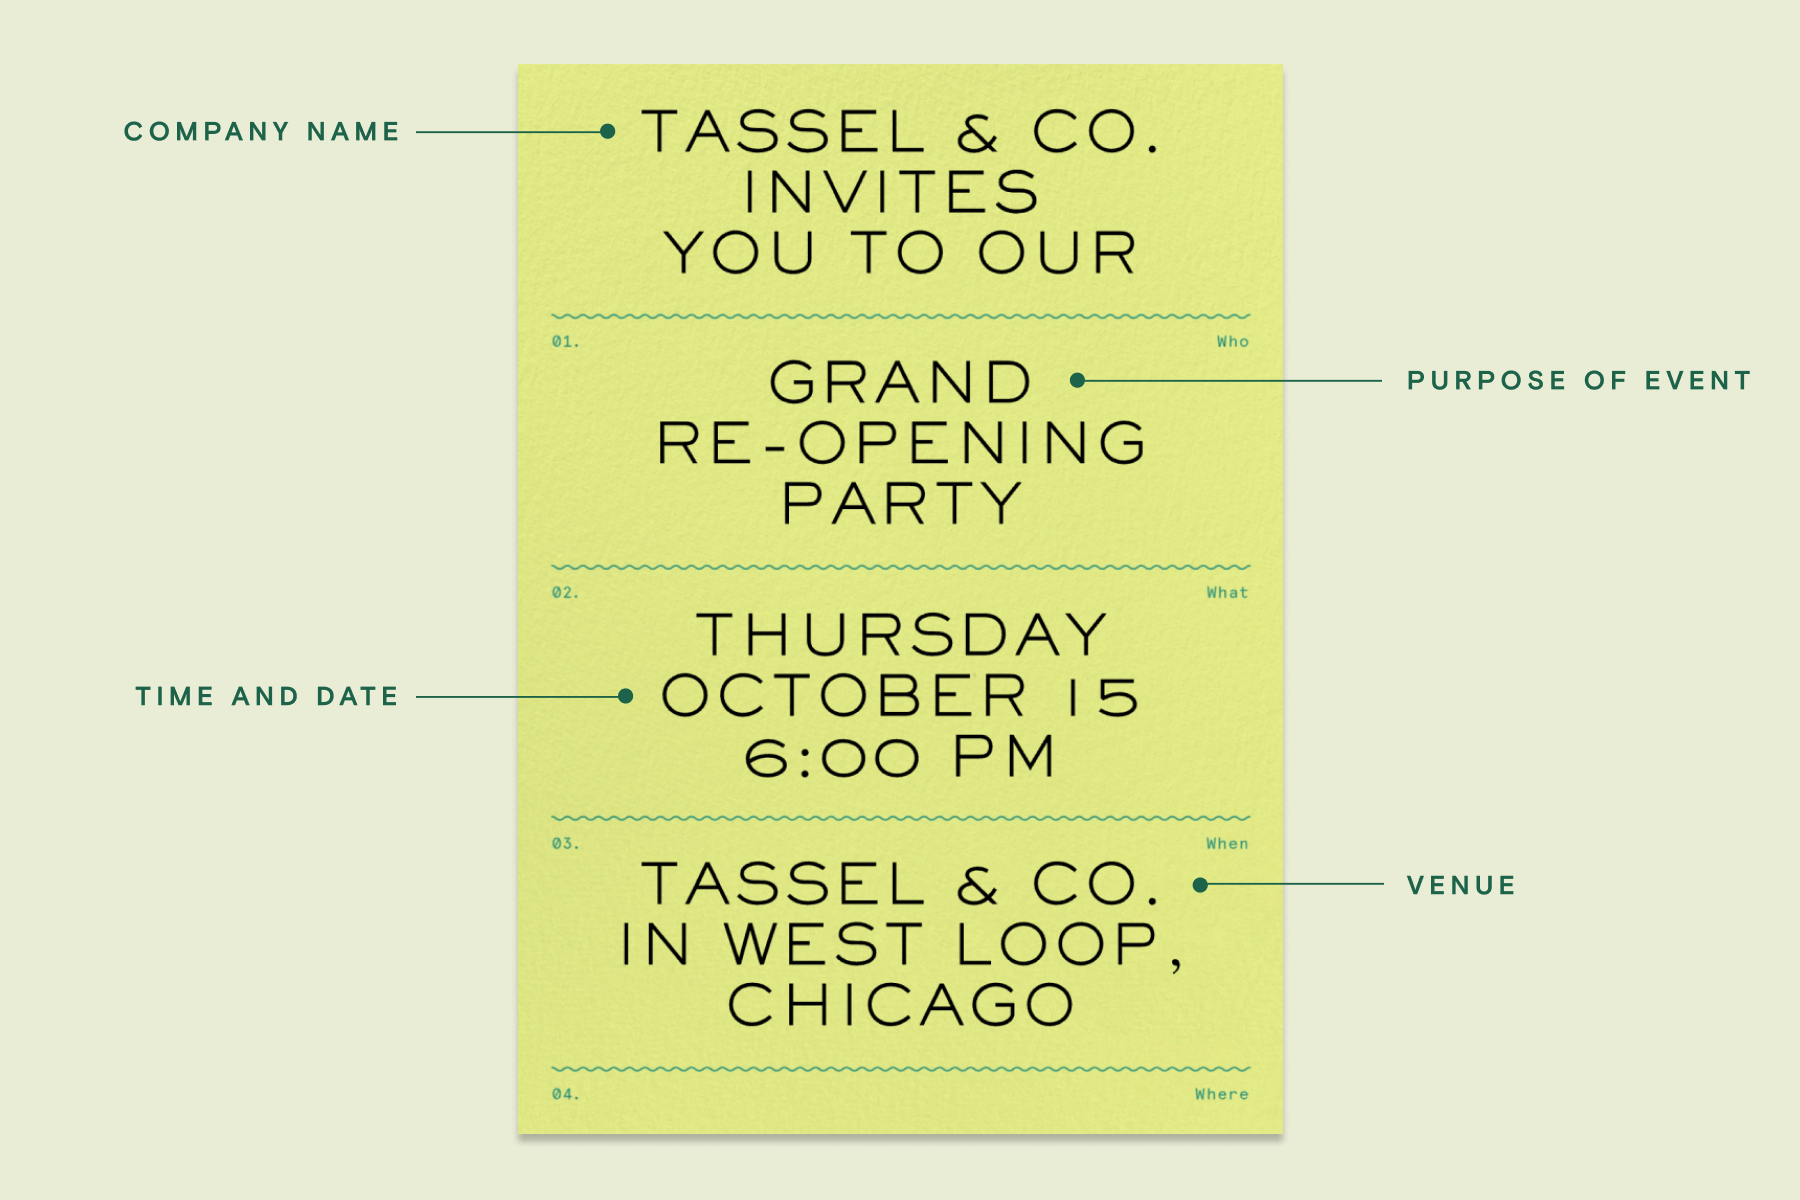 A lime green invitation with event details in sans serif letters, diagramed to show what should be included based on this post.